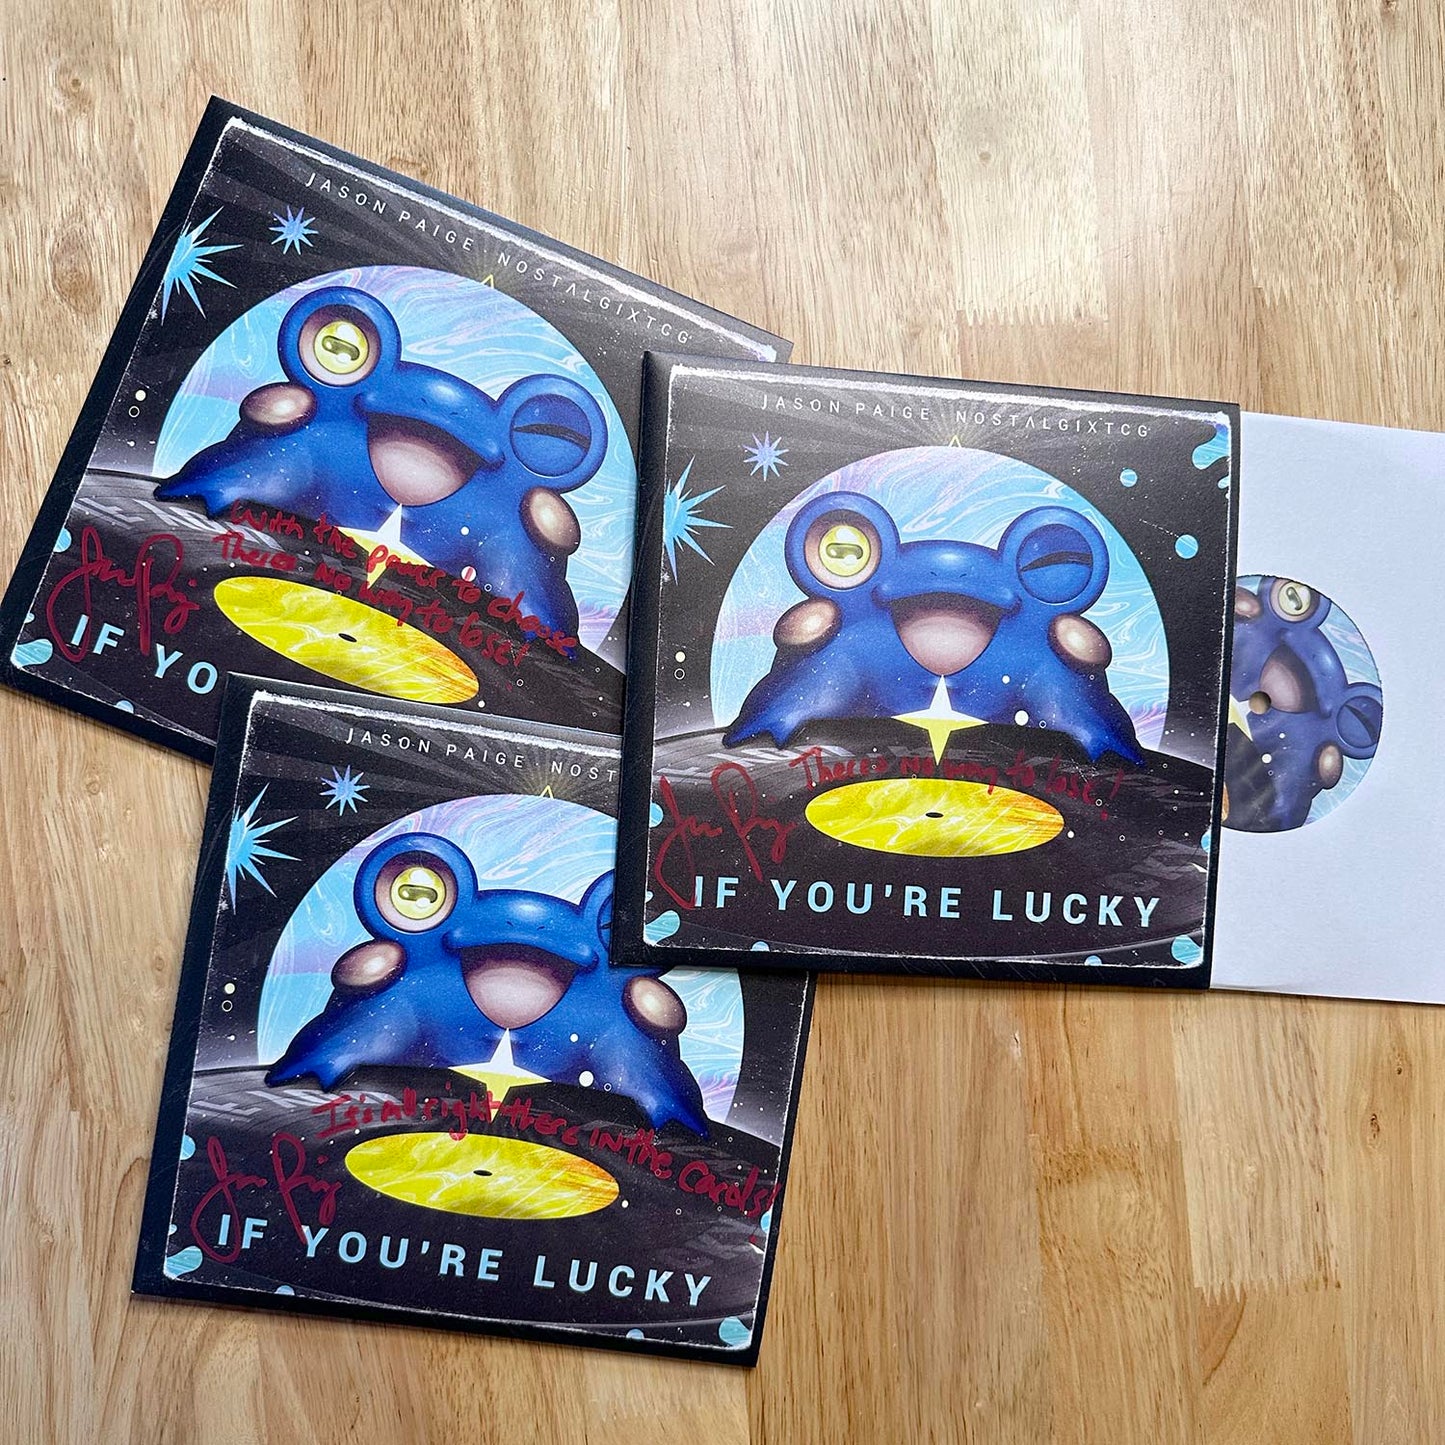 
                  
                    "If You're Lucky" 7" Vinyl Signed by Artist Jason Paige!
                  
                